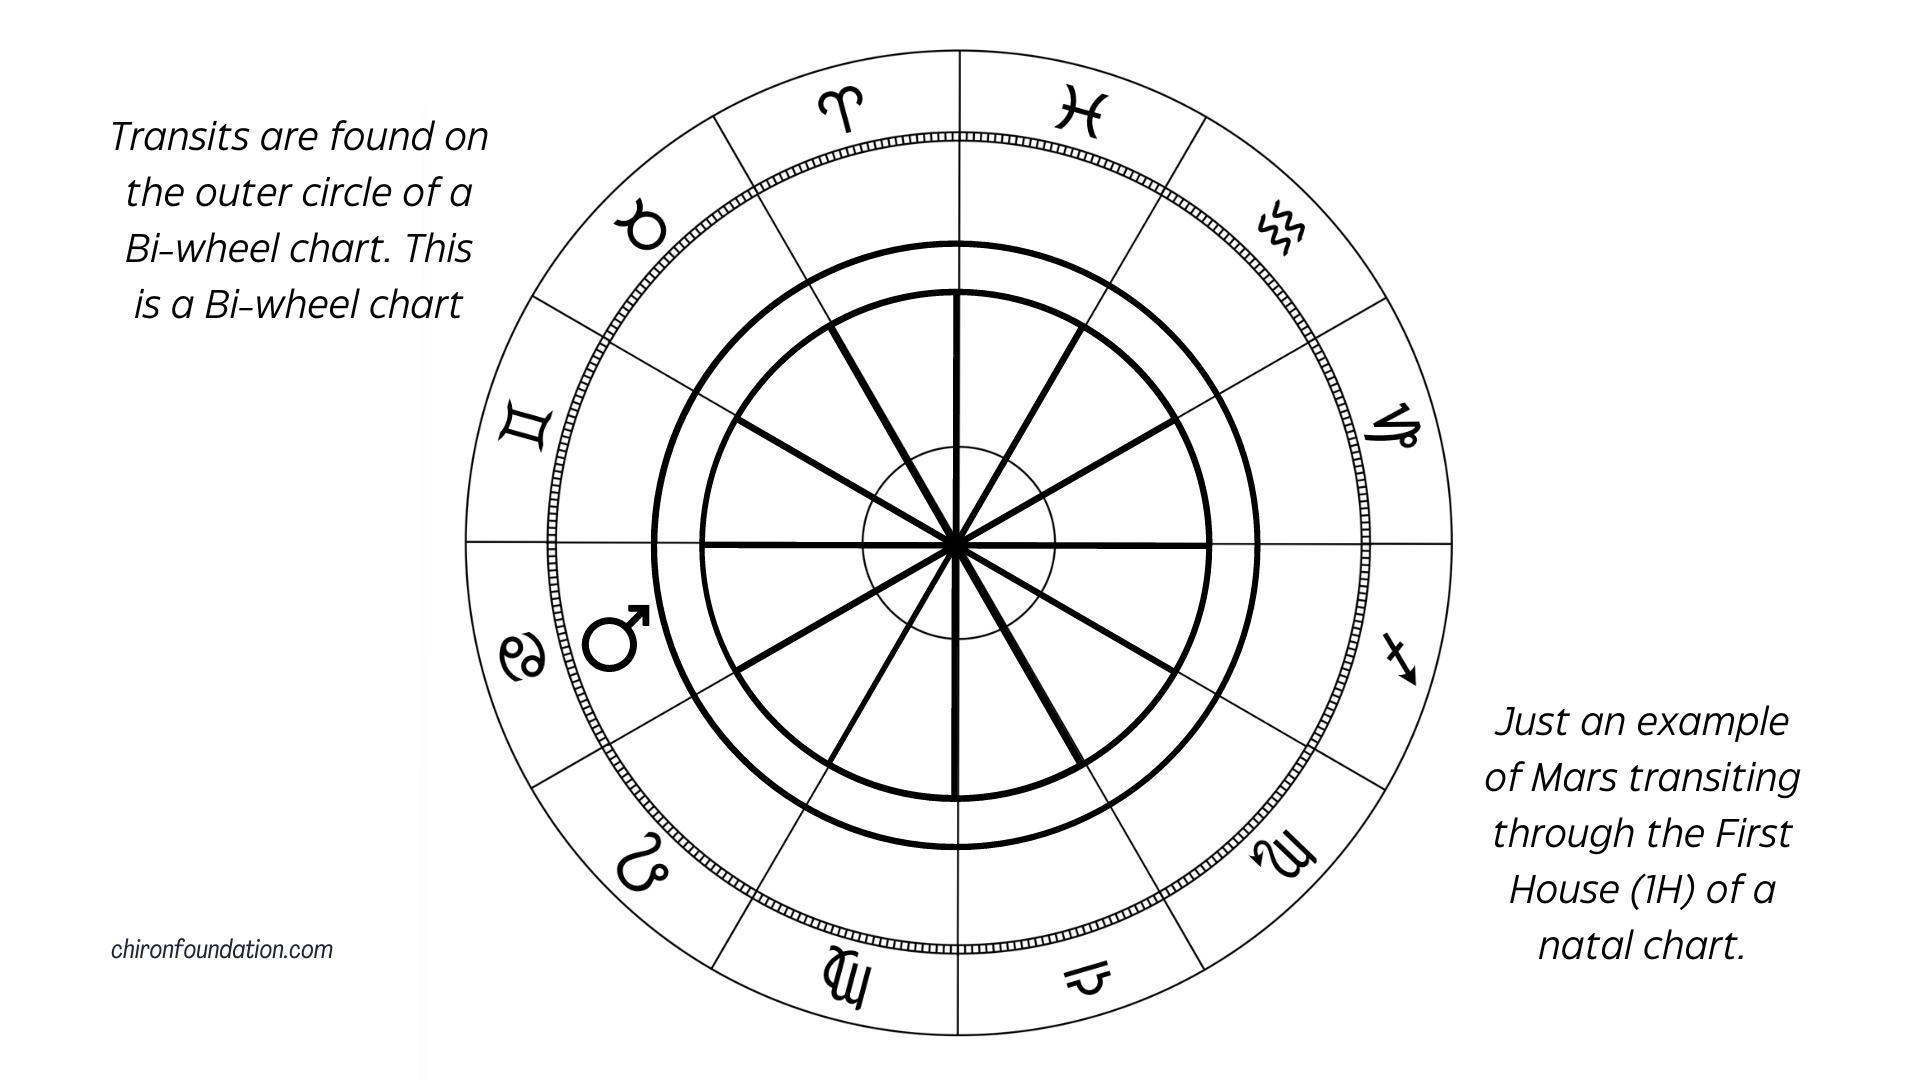 An example of Mars transiting through the first house of a natal chart